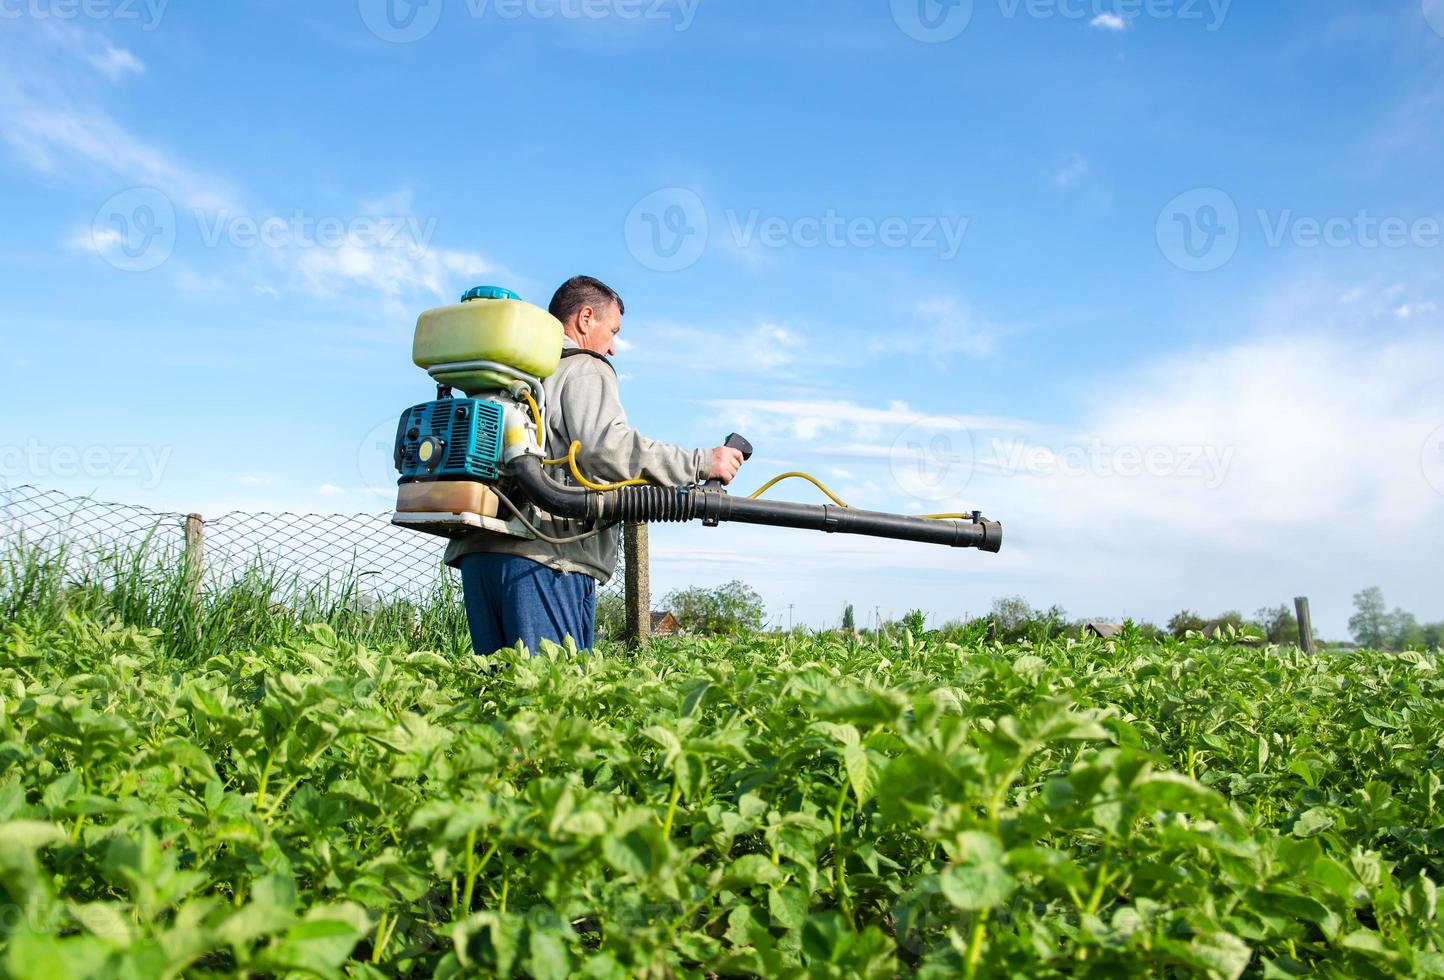 Male farmer with a mist sprayer processes potato bushes with chemicals. Protection of cultivated plants from insects and fungal infections. Control of use of chemicals. Farming growing vegetables photo